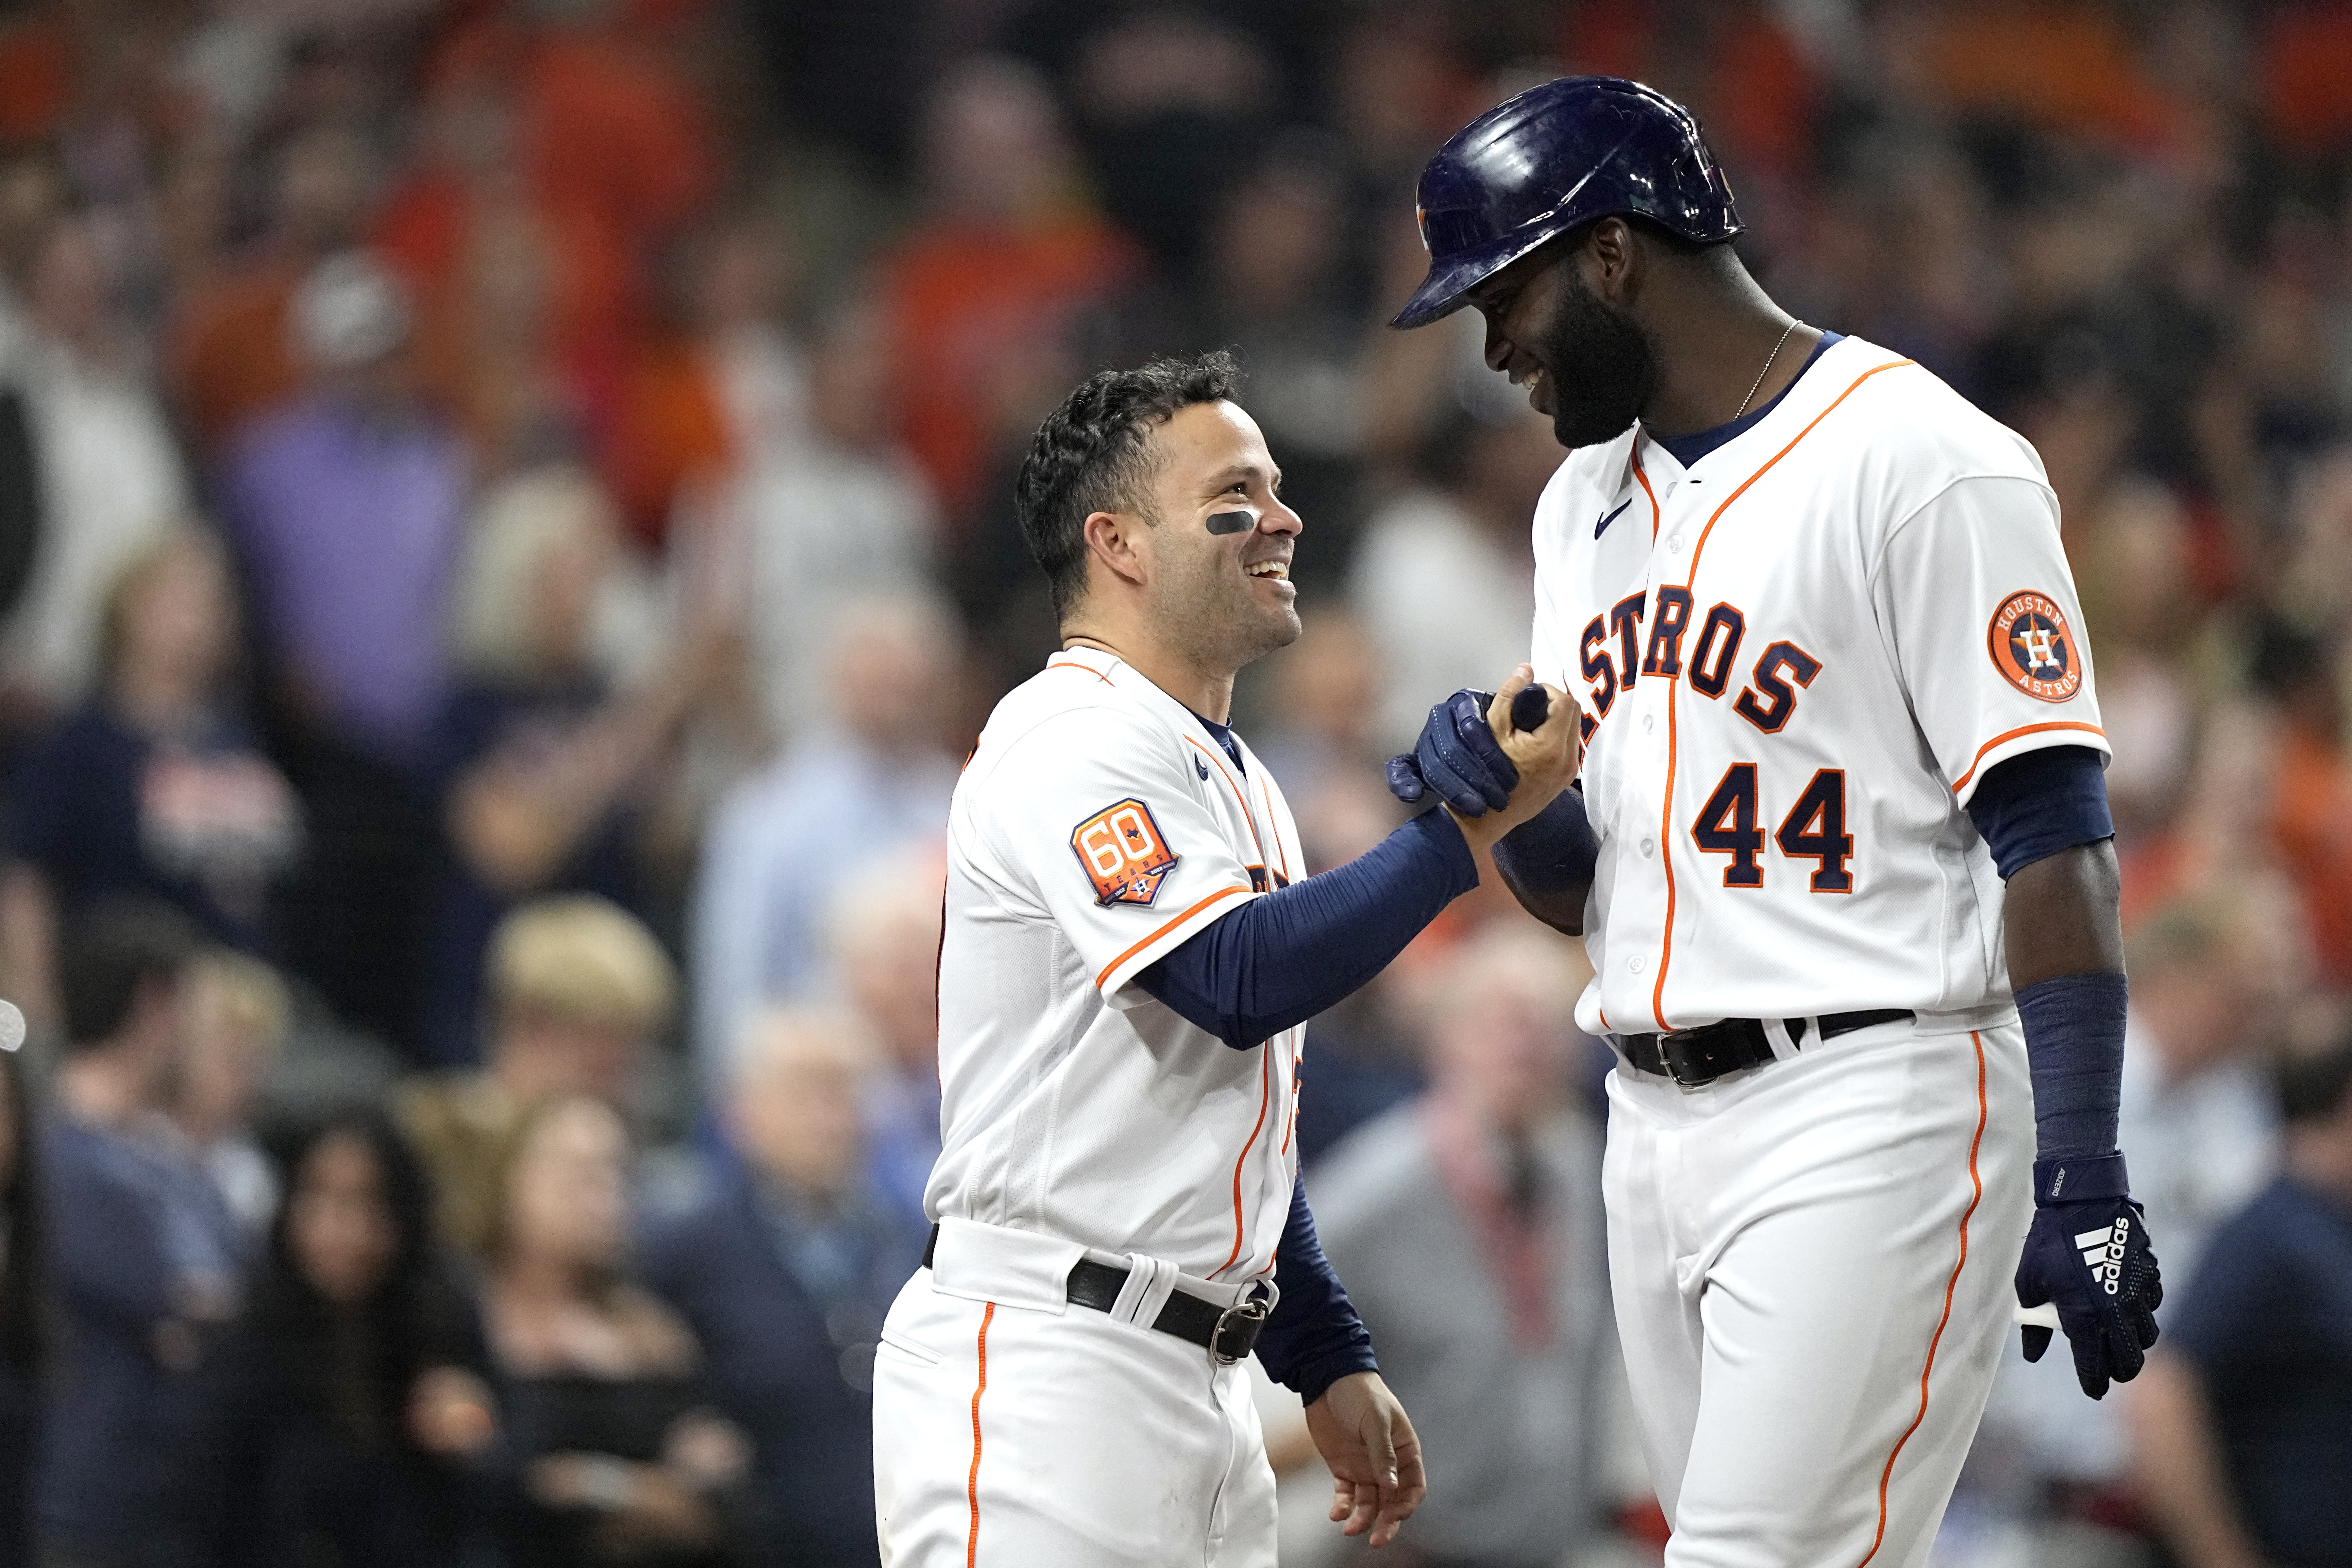 Houston's Altuve leaves game with hamstring injury in 8th